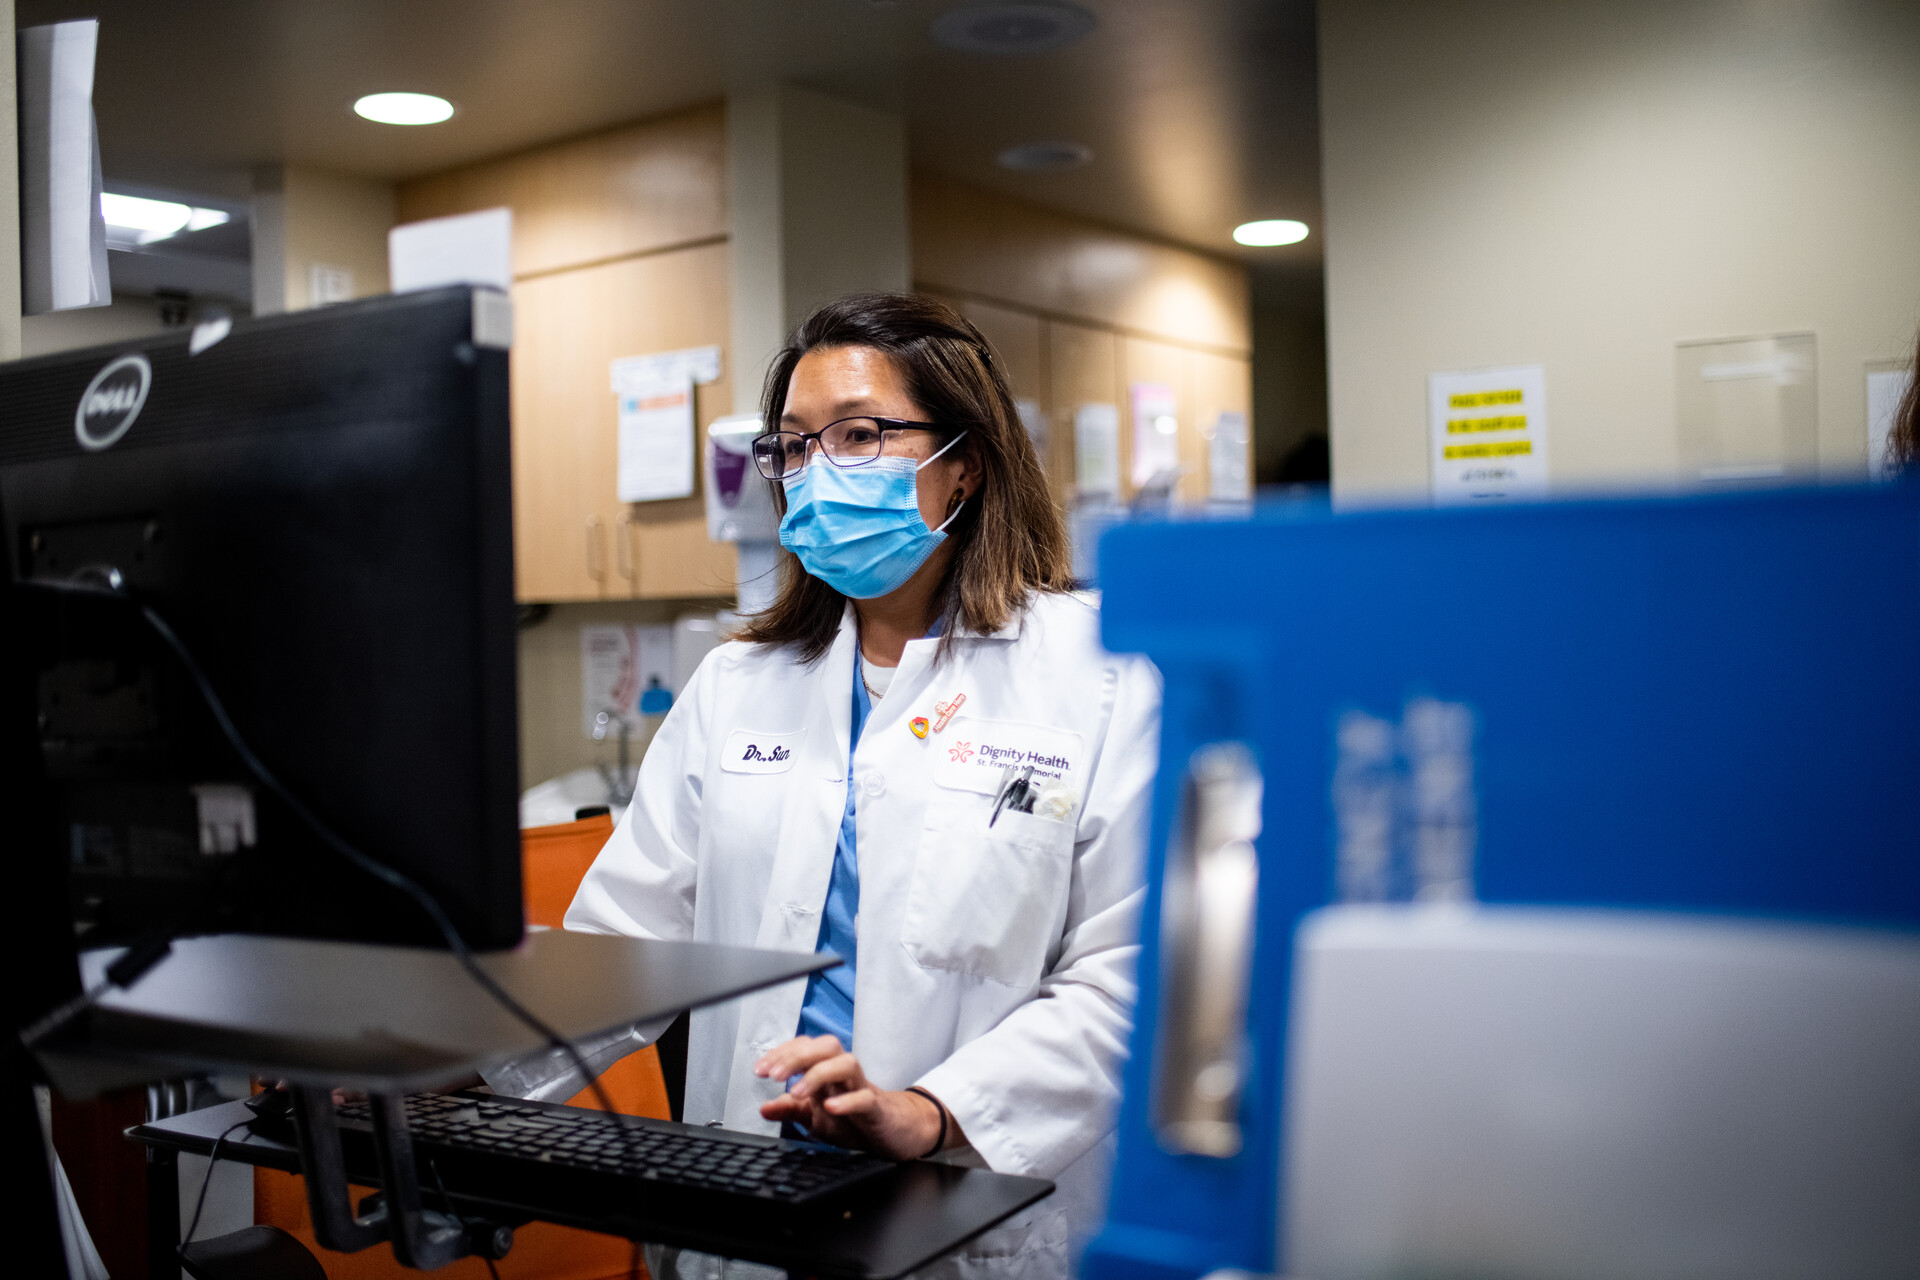 A woman with a white lab coat and face mask standing at a computer.